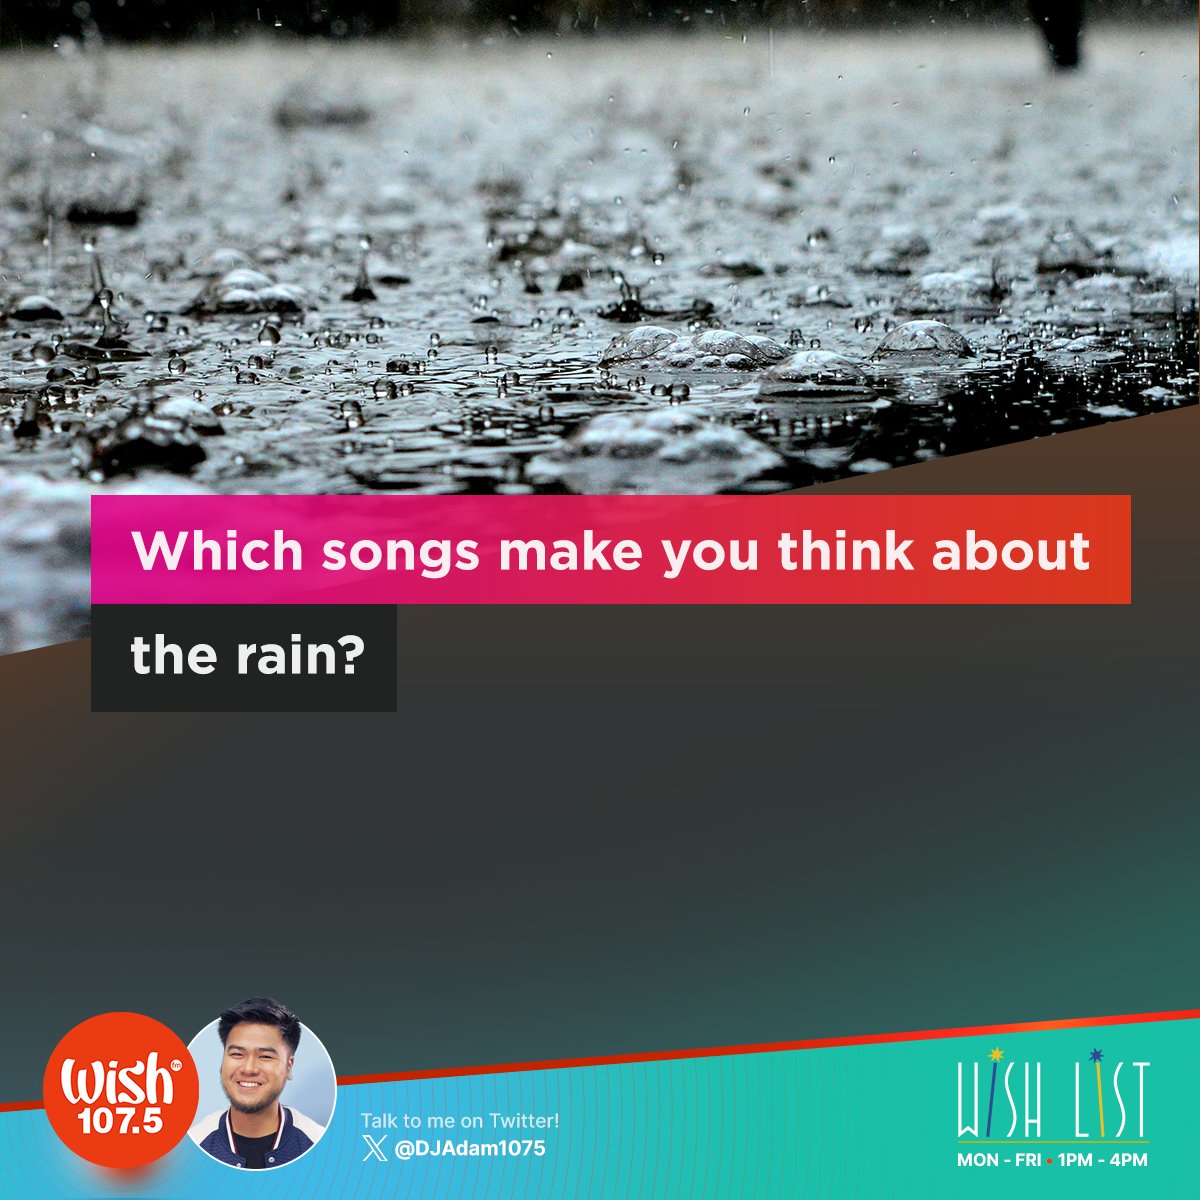 As the summer sun continues to deliver sweltering heat, our longing for a refreshing rain has never been more pronounced. We're curious — which songs make you think about the rain? ☔ Freshen up your vibe and tune in to your afternoon on-air buddy, The Wish List.